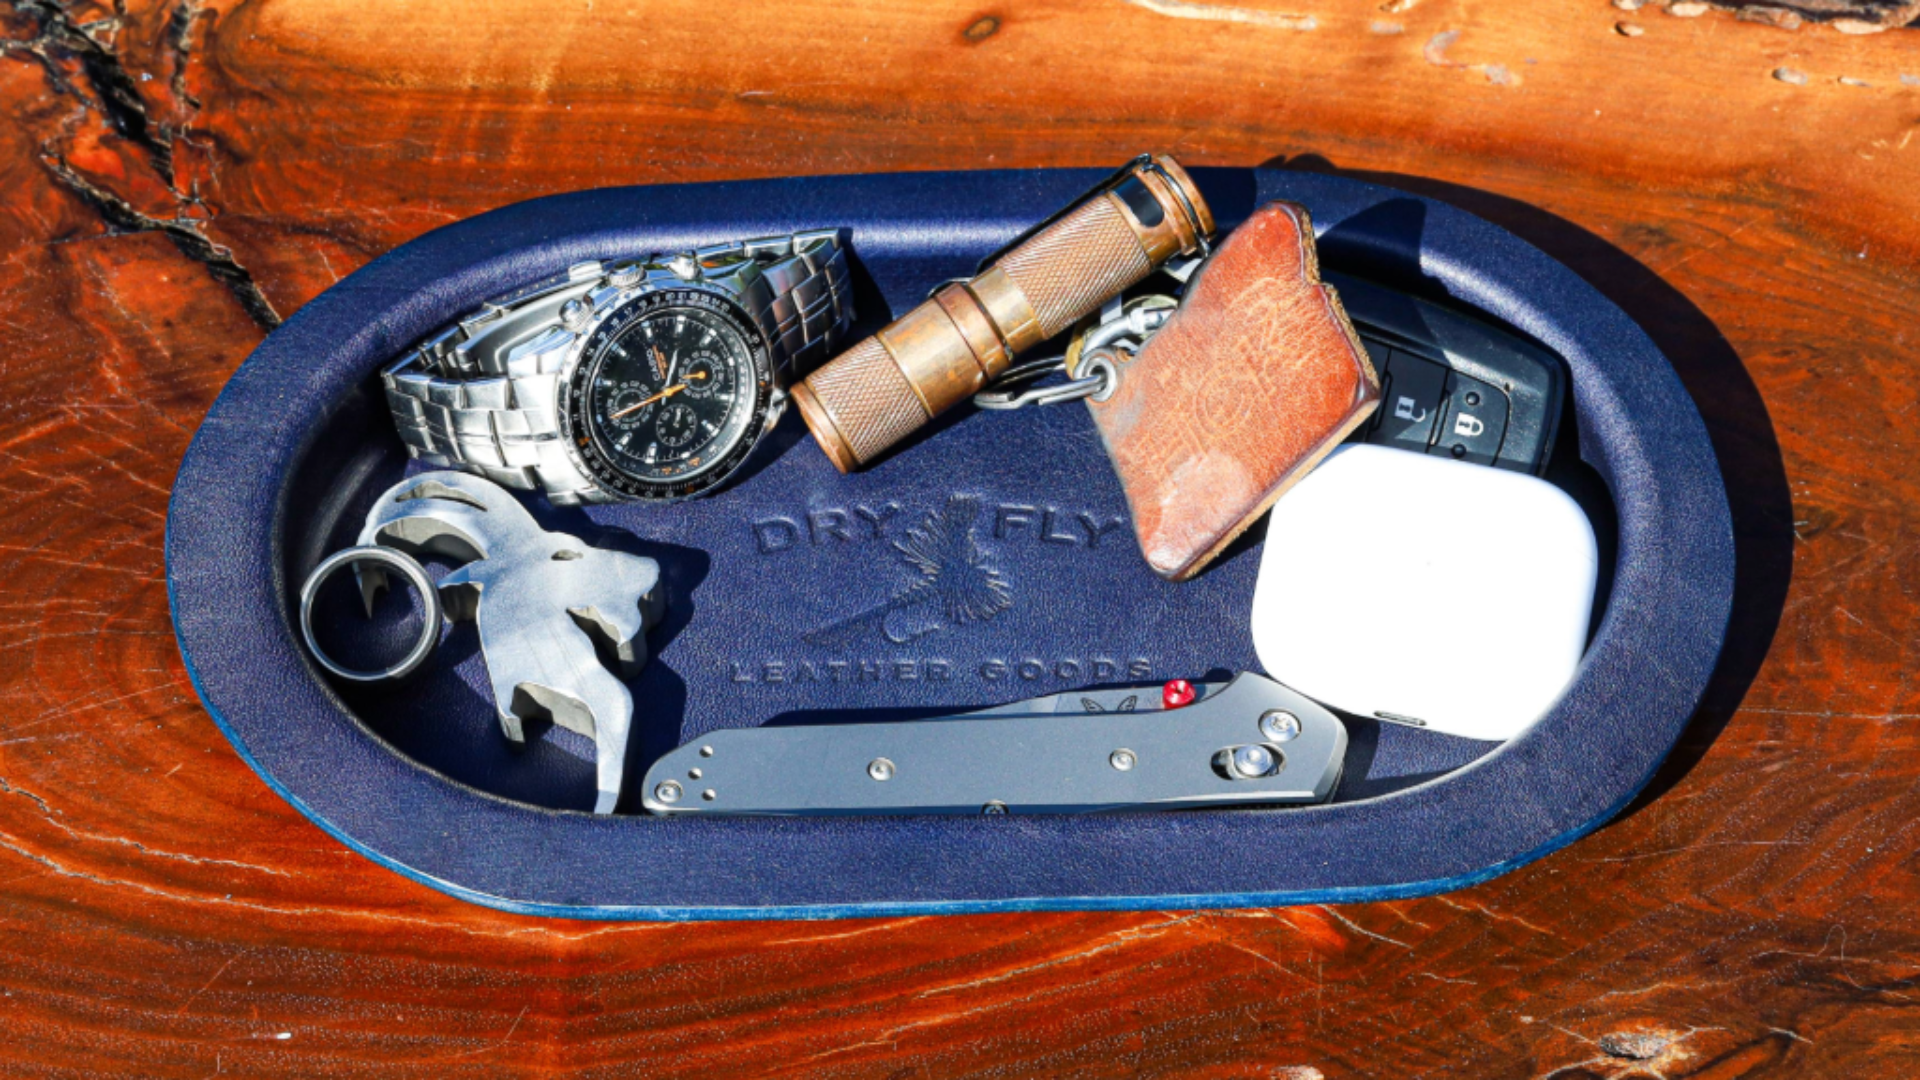 benchmade osborne ring goat head bottle opener airpods watch olight keychain in a dry fly leather goods valet tray